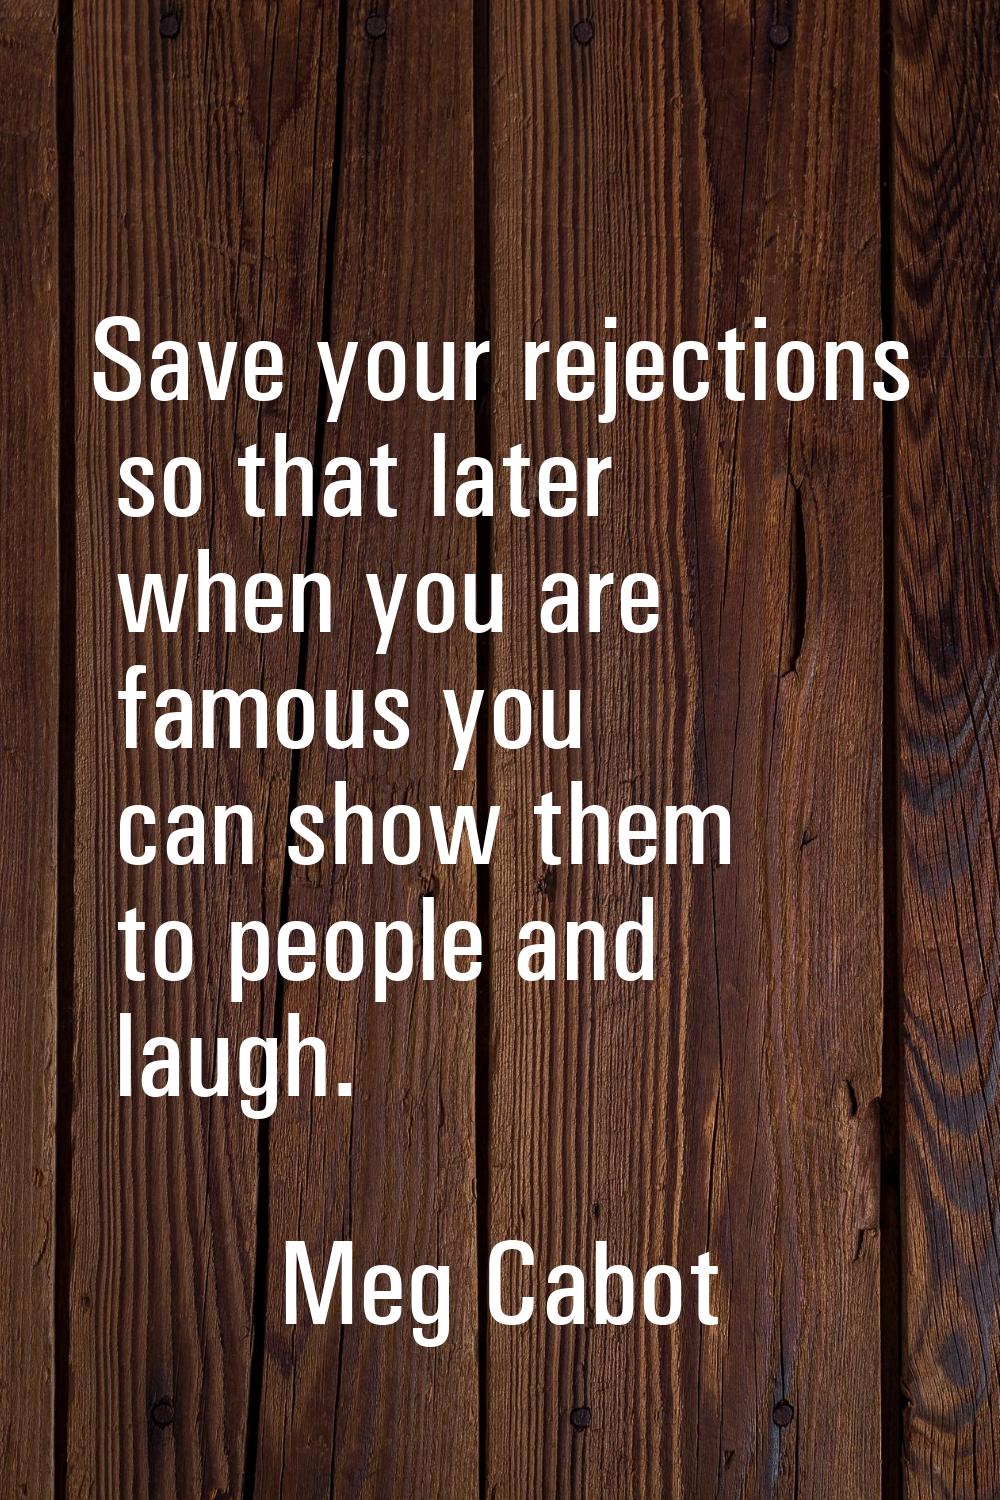 Save your rejections so that later when you are famous you can show them to people and laugh.